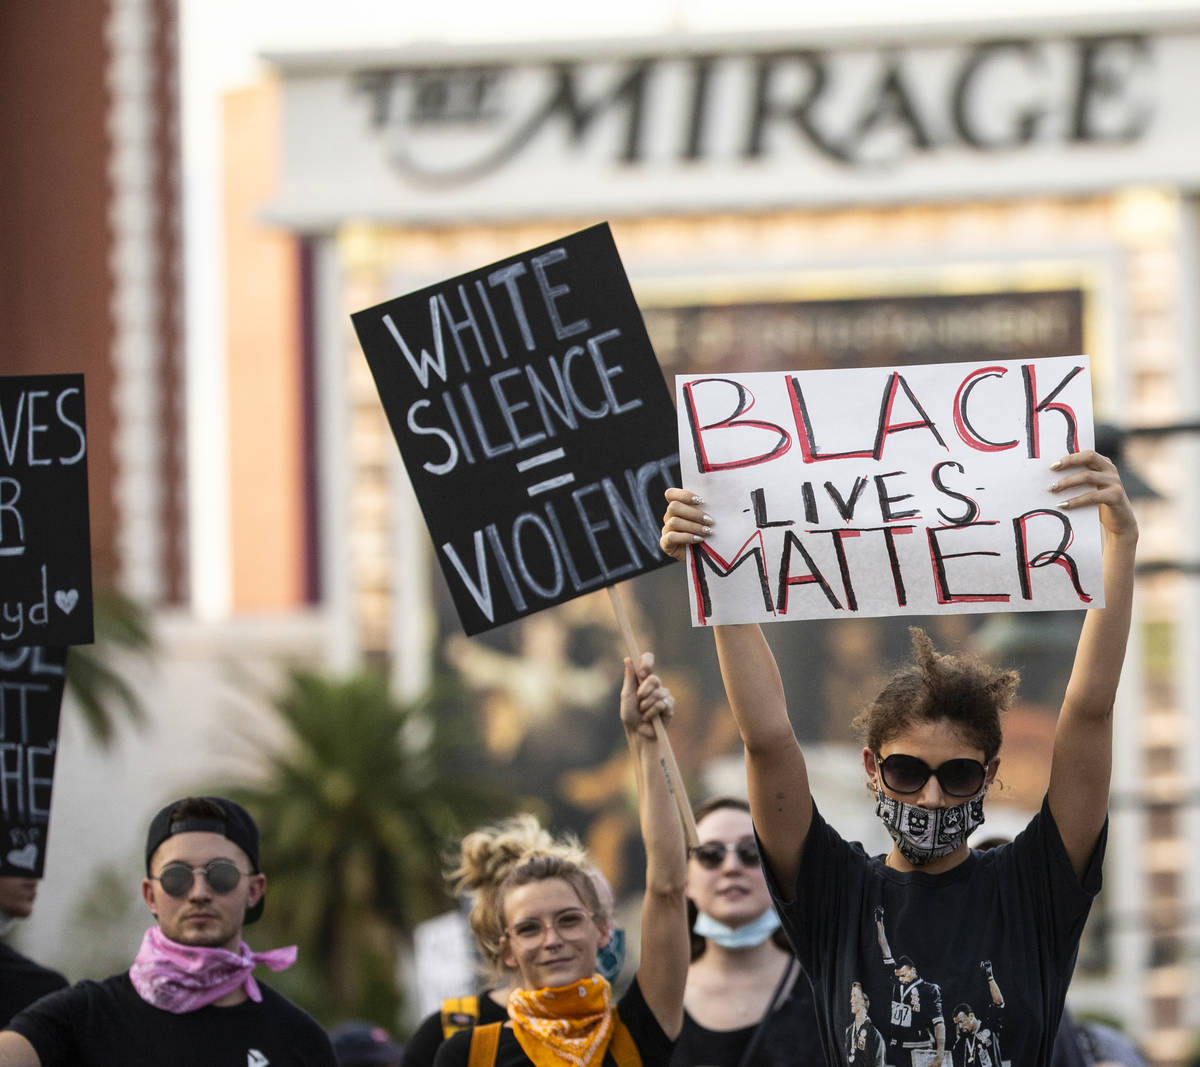 A large crowd protests on the Strip on Monday, June 1, 2020, in Las Vegas as riots continue thr ...